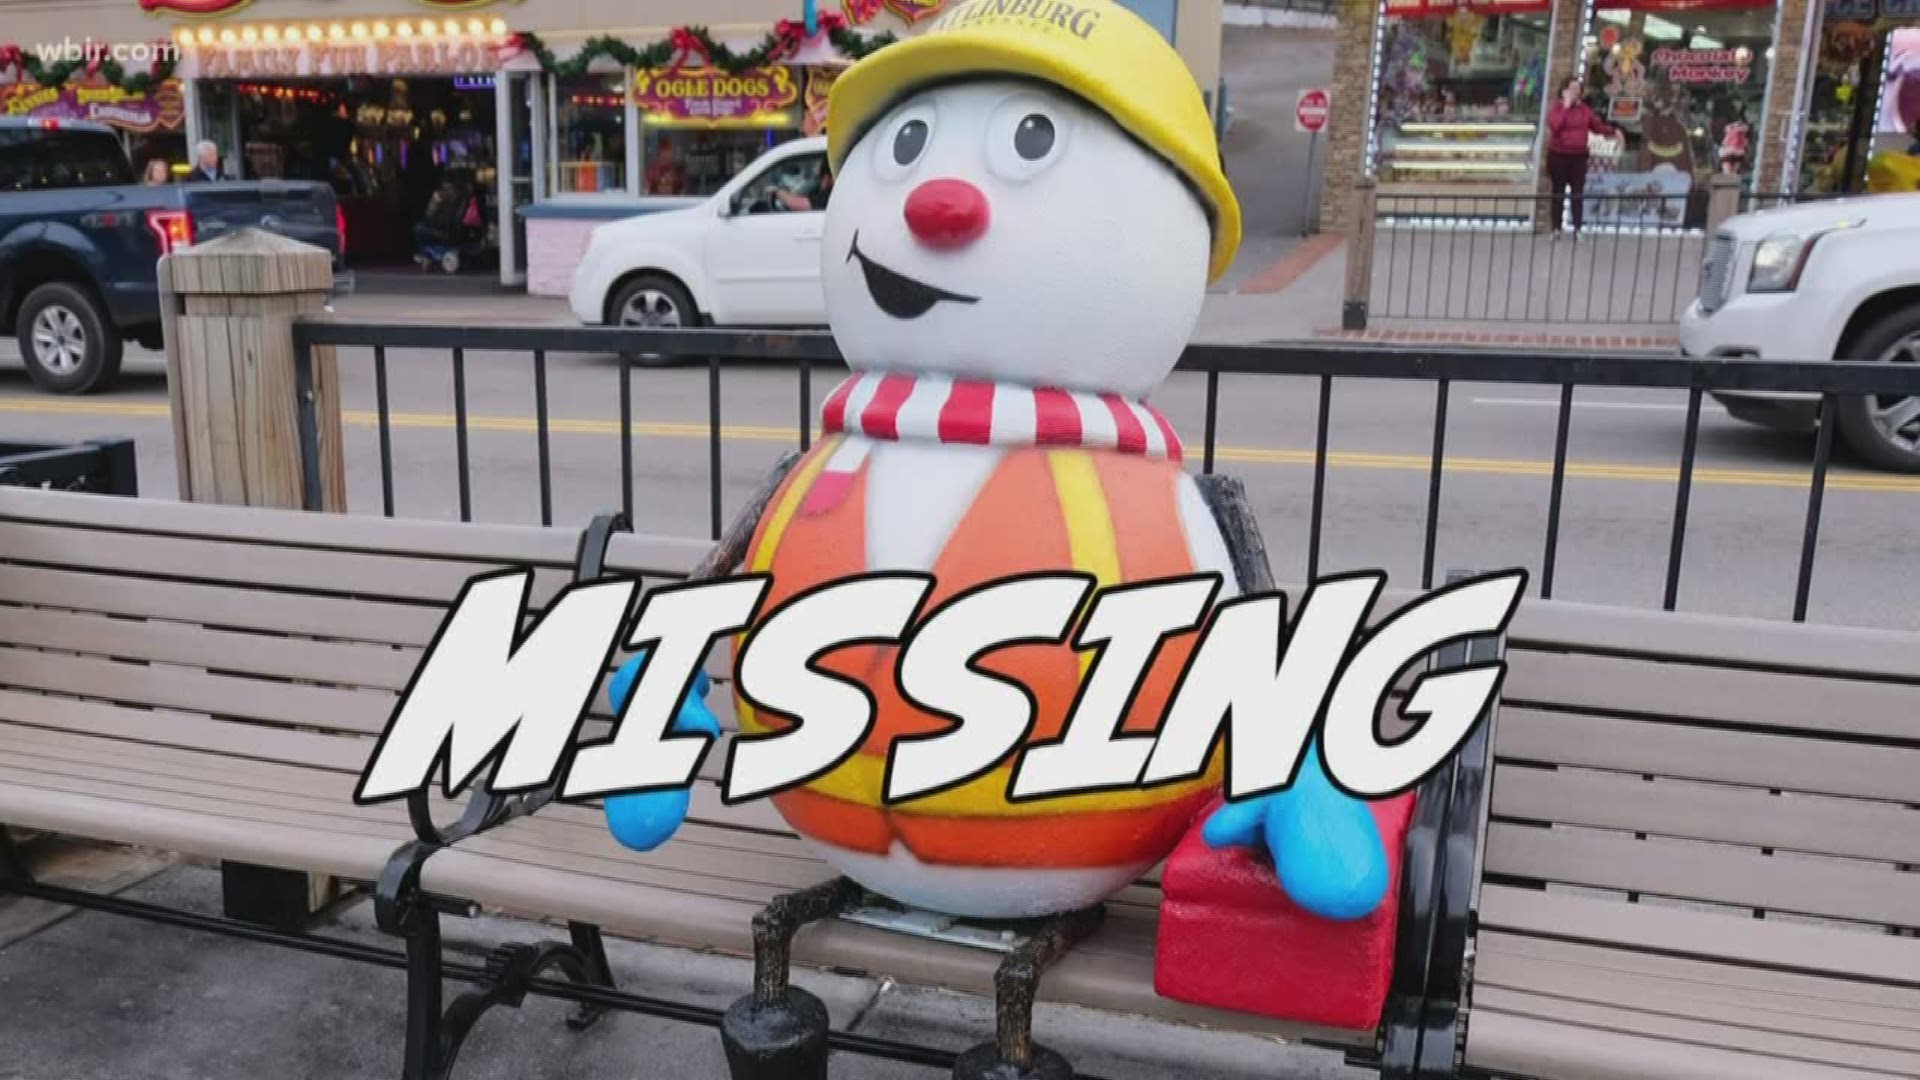 You may have seen "HAL," a snowman statue in safety gear, smiling on a Gatlinburg bench. The city is trying to #BringHalBack!